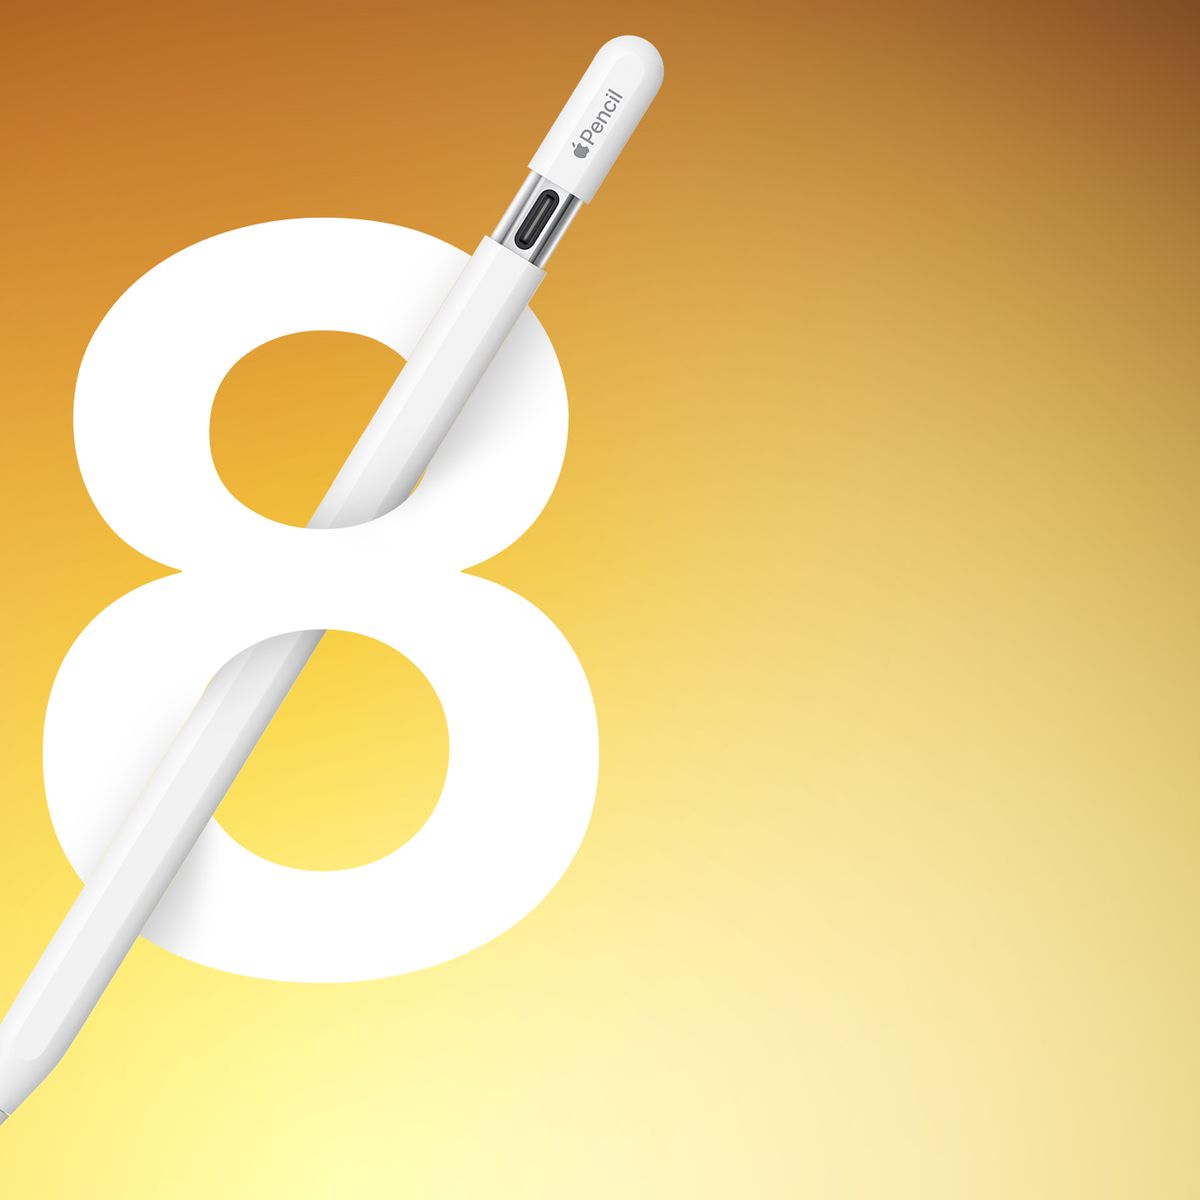 Apple Pencil Now Eligible for AppleCare+ Even Without Being Purchased  Alongside an iPad - MacRumors